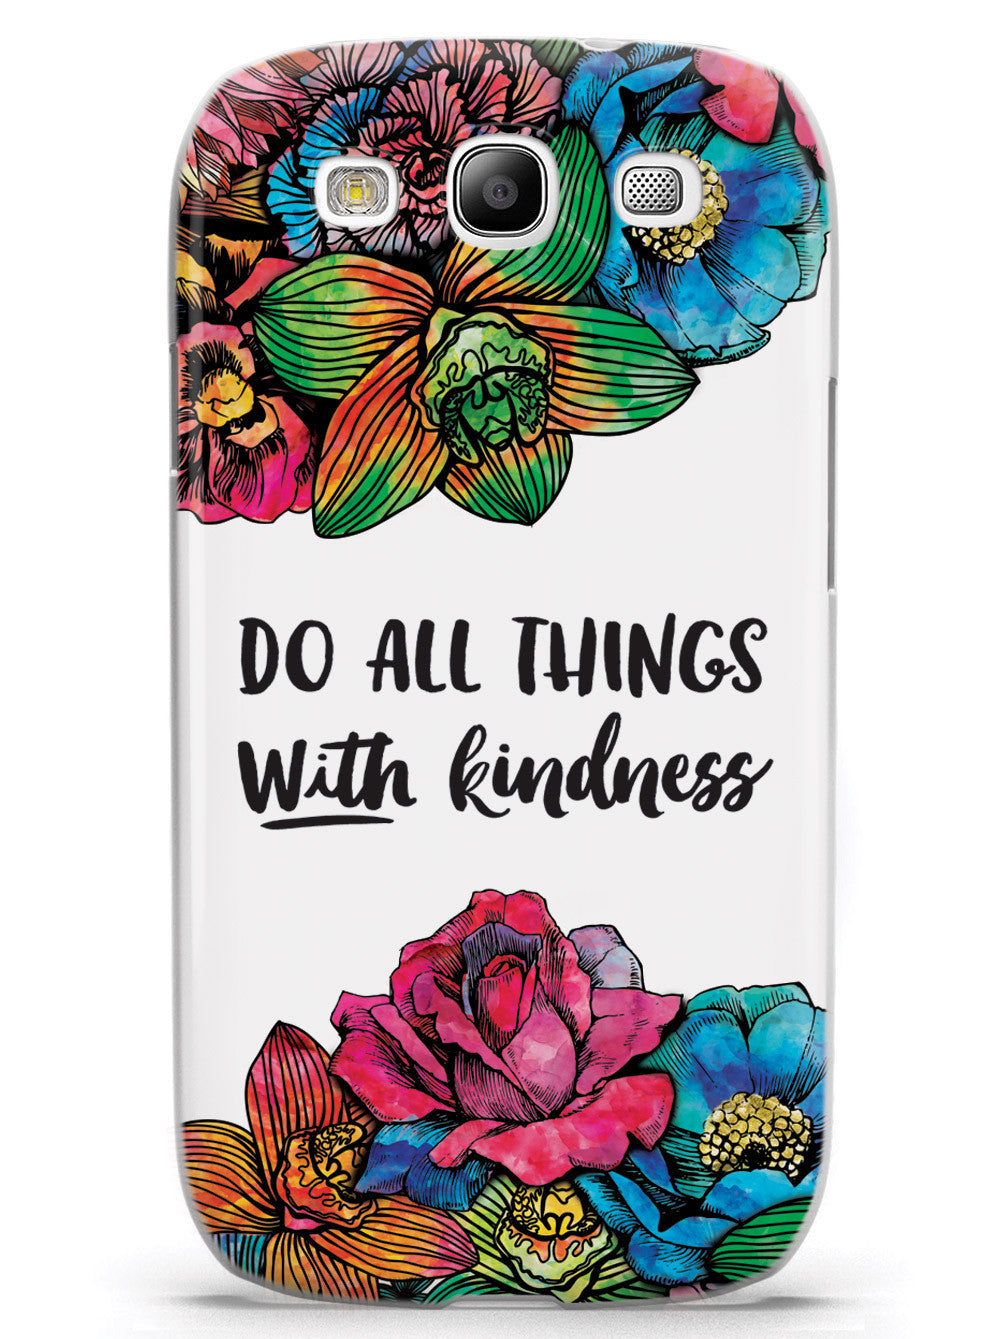 Do All Things With Kindness - Watercolor Flowers Case